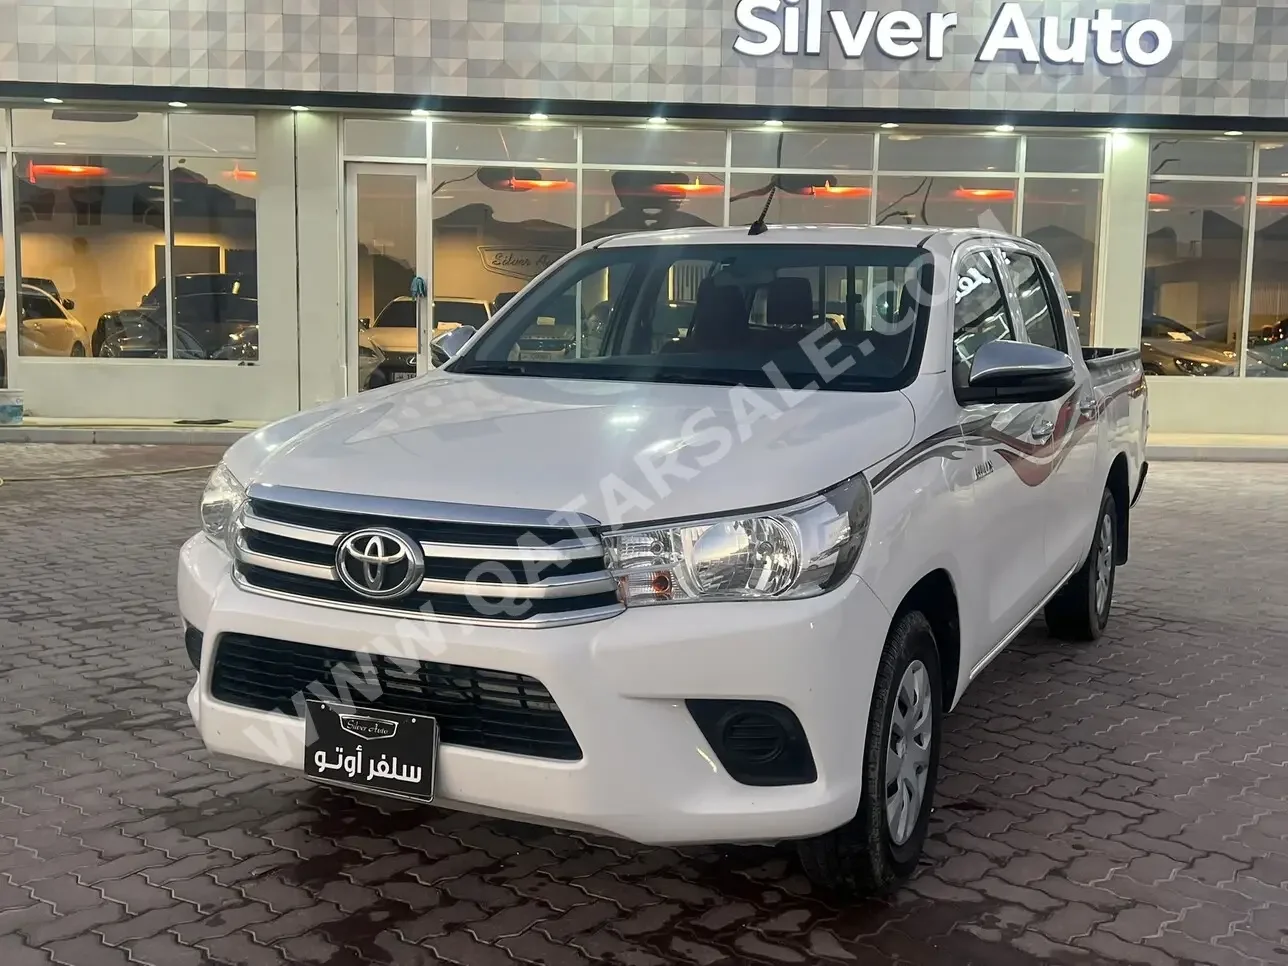 Toyota  Hilux  SR5  2020  Manual  197,000 Km  4 Cylinder  Four Wheel Drive (4WD)  Pick Up  White